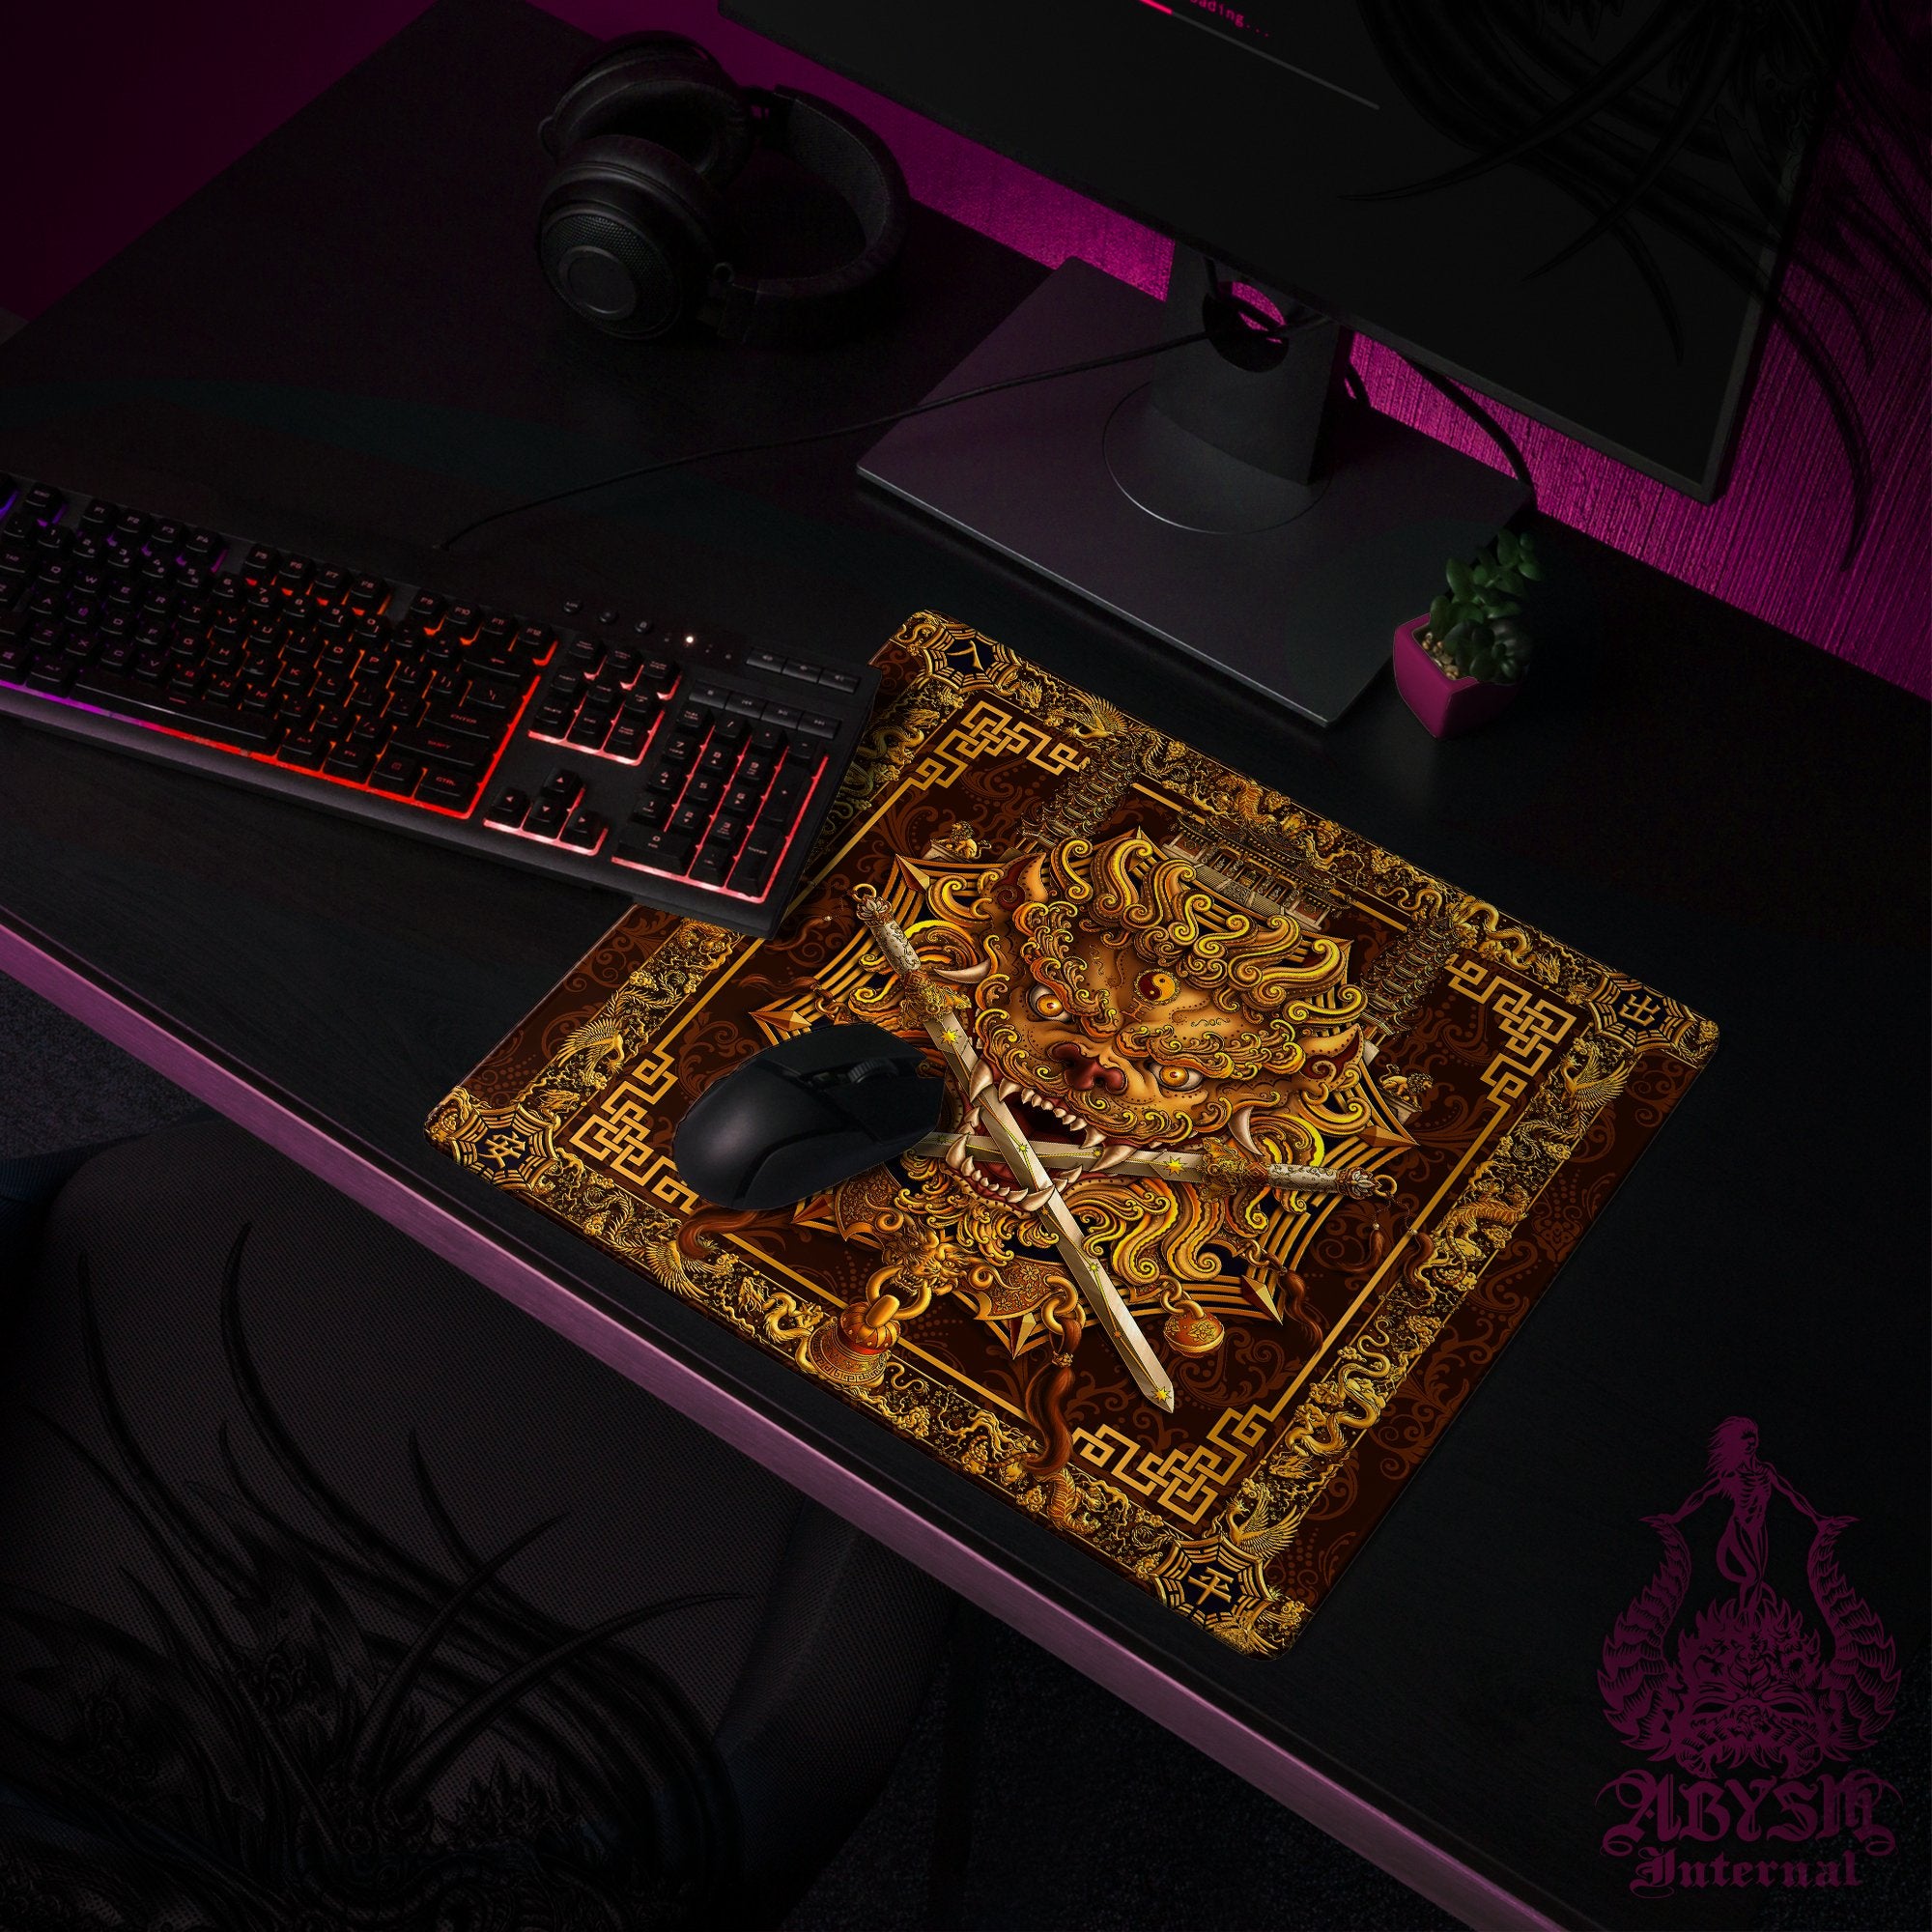 Gold Lion Gaming Mouse Pad, Taiwan Desk Mat, Chinese Table Protector Cover, Asian Workpad, Fanasy Art Print - Abysm Internal